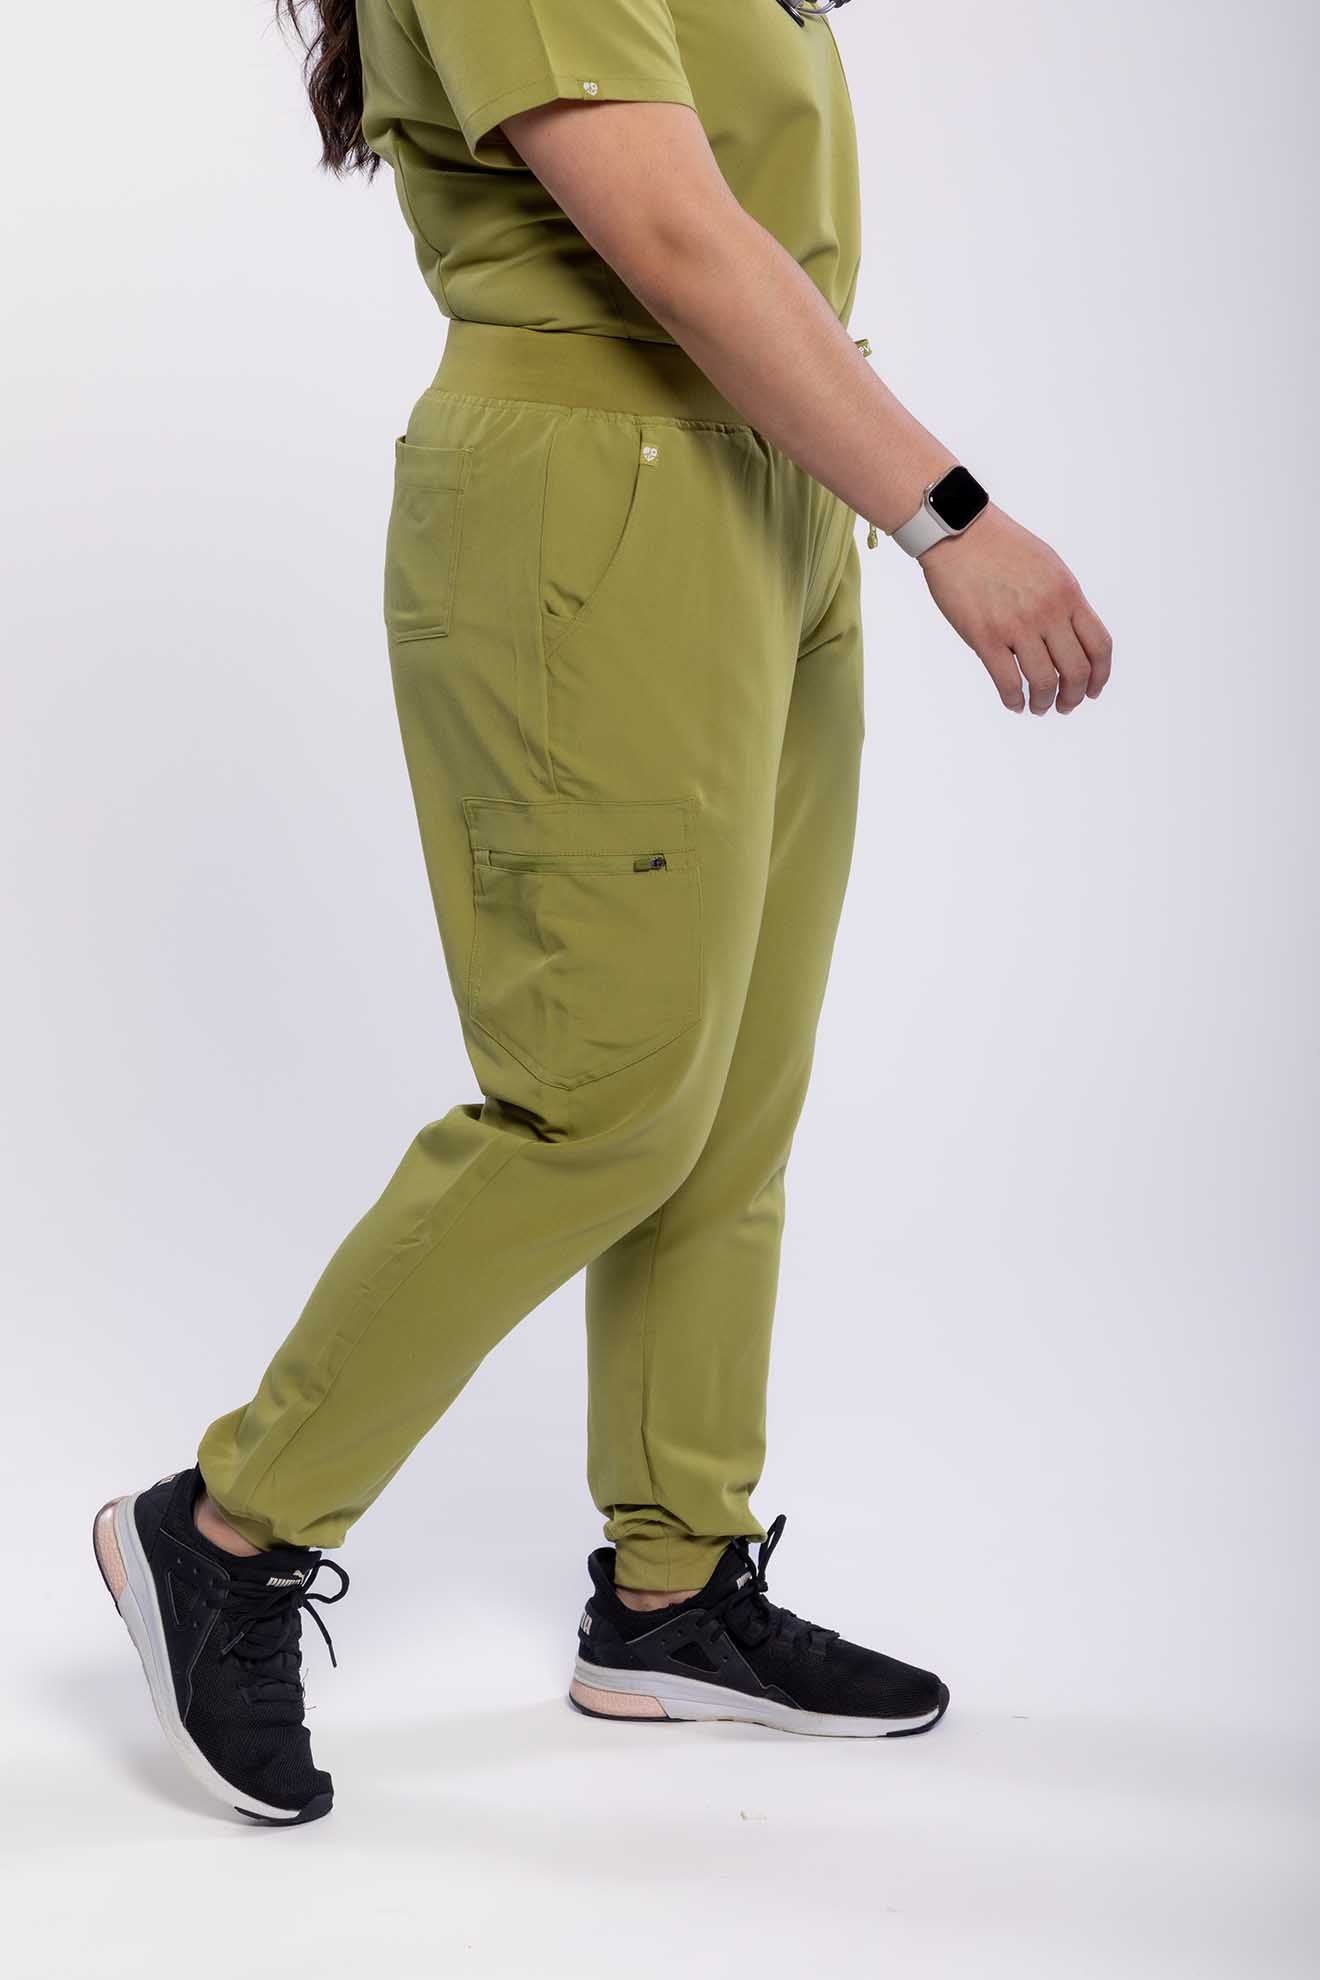 Women's SAYA Jogger Scrub Pant in olive colour featuring side angle #colour_olive